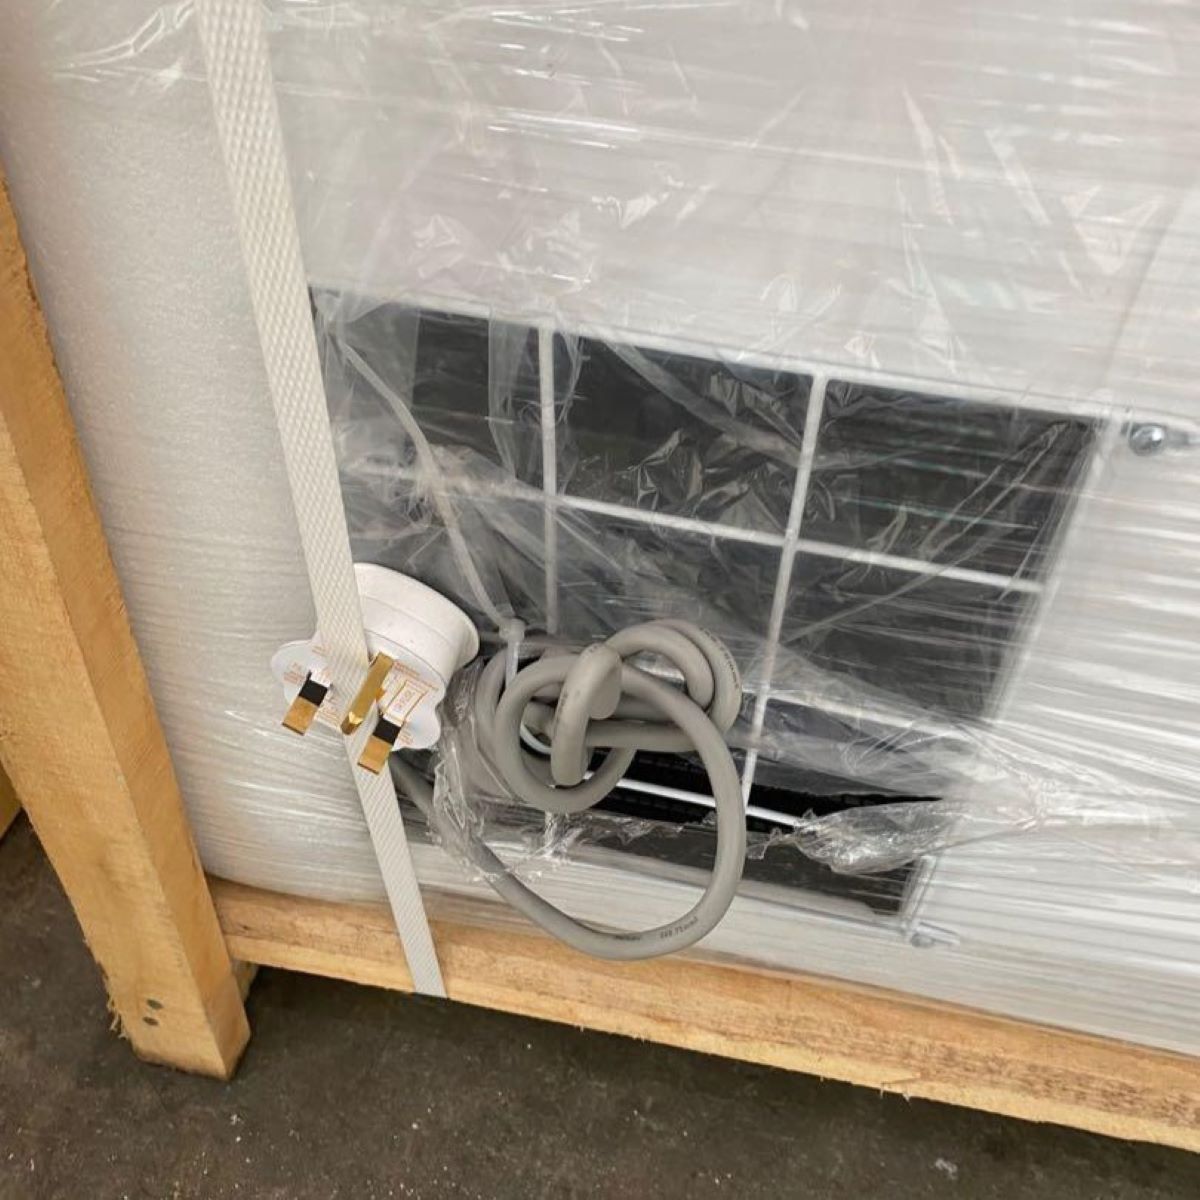 How To Remove The Electrical Cord From The Back Of An Arctic King 5Cu Freezer